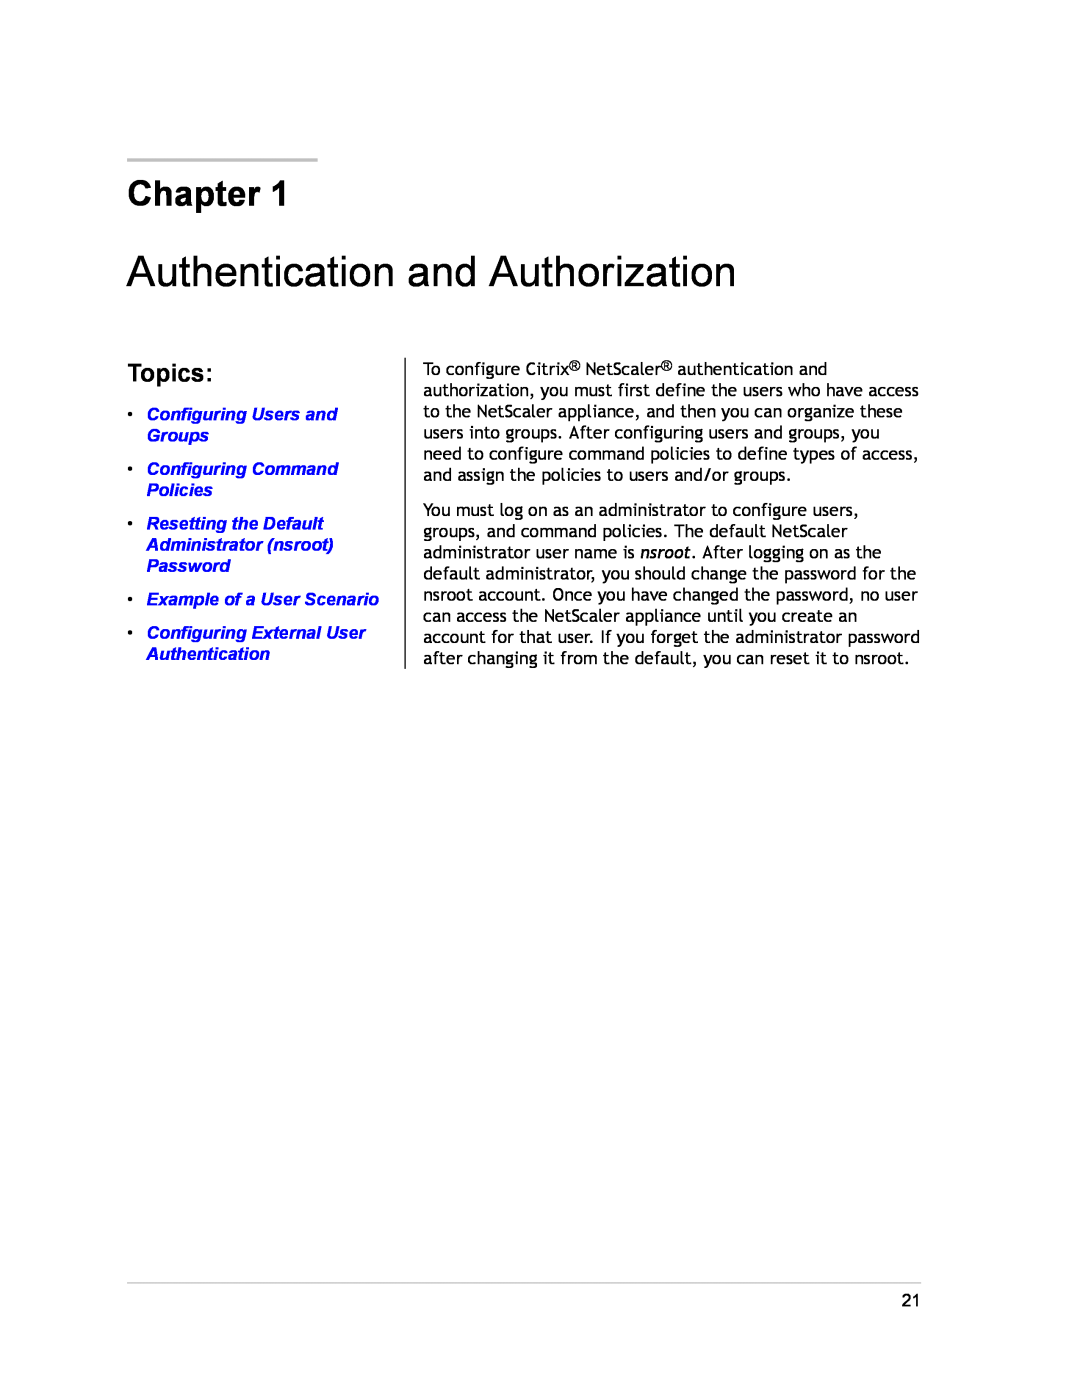 Citrix Systems CITRIX NETSCALER 9.3 manual Authentication and Authorization, Chapter, Topics 